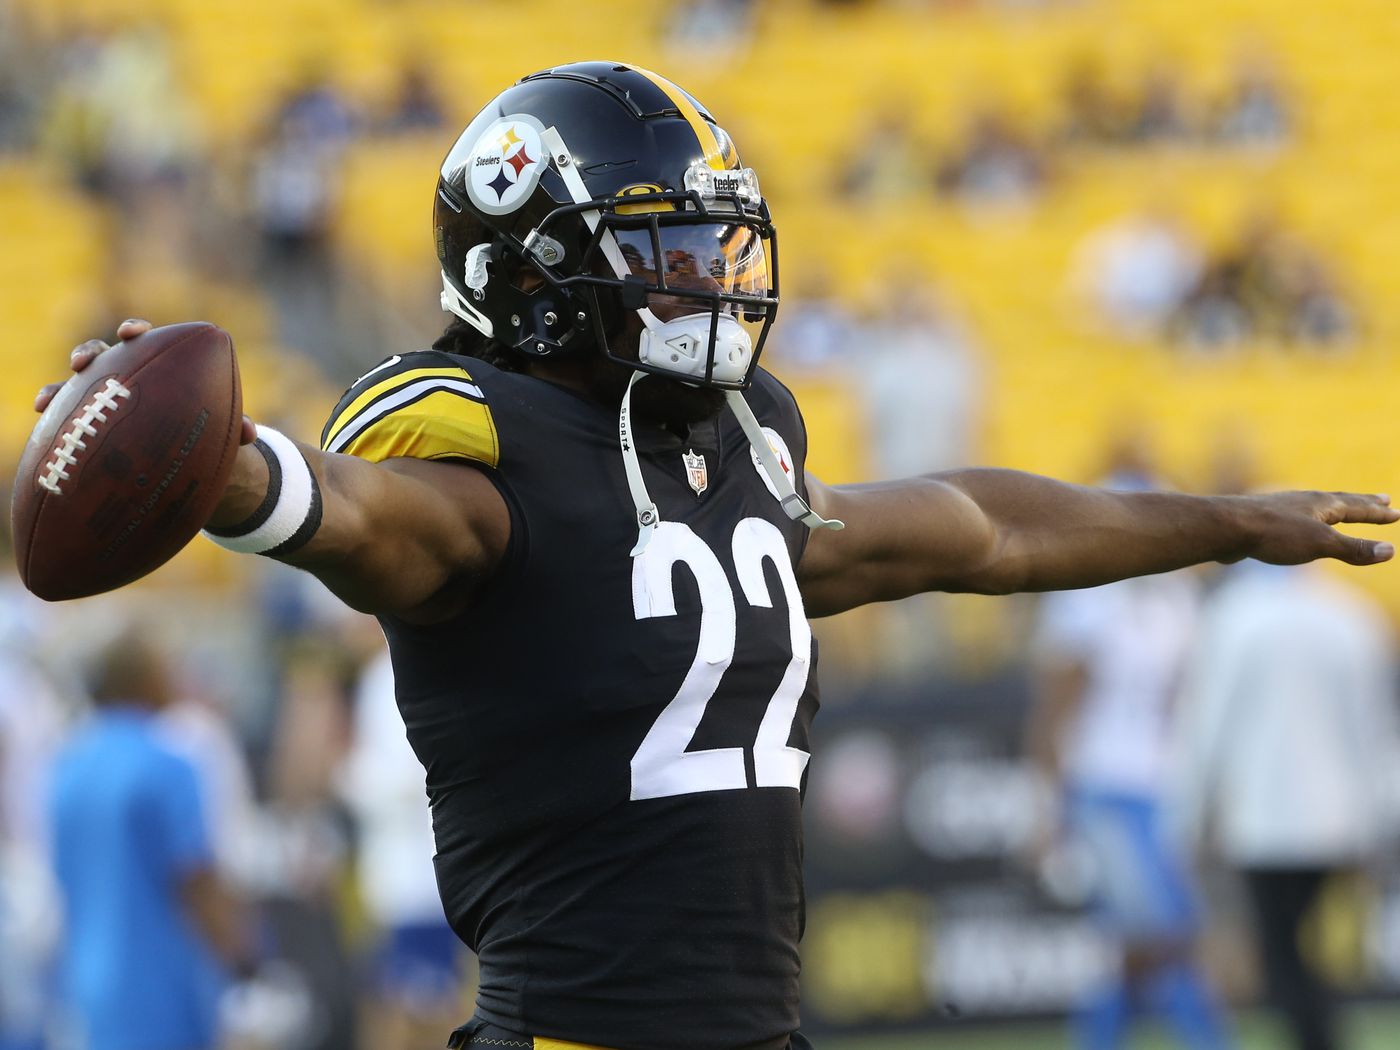 RB Najee Harris is set up to shine for the Steelers in Week 1 the Steel Curtain